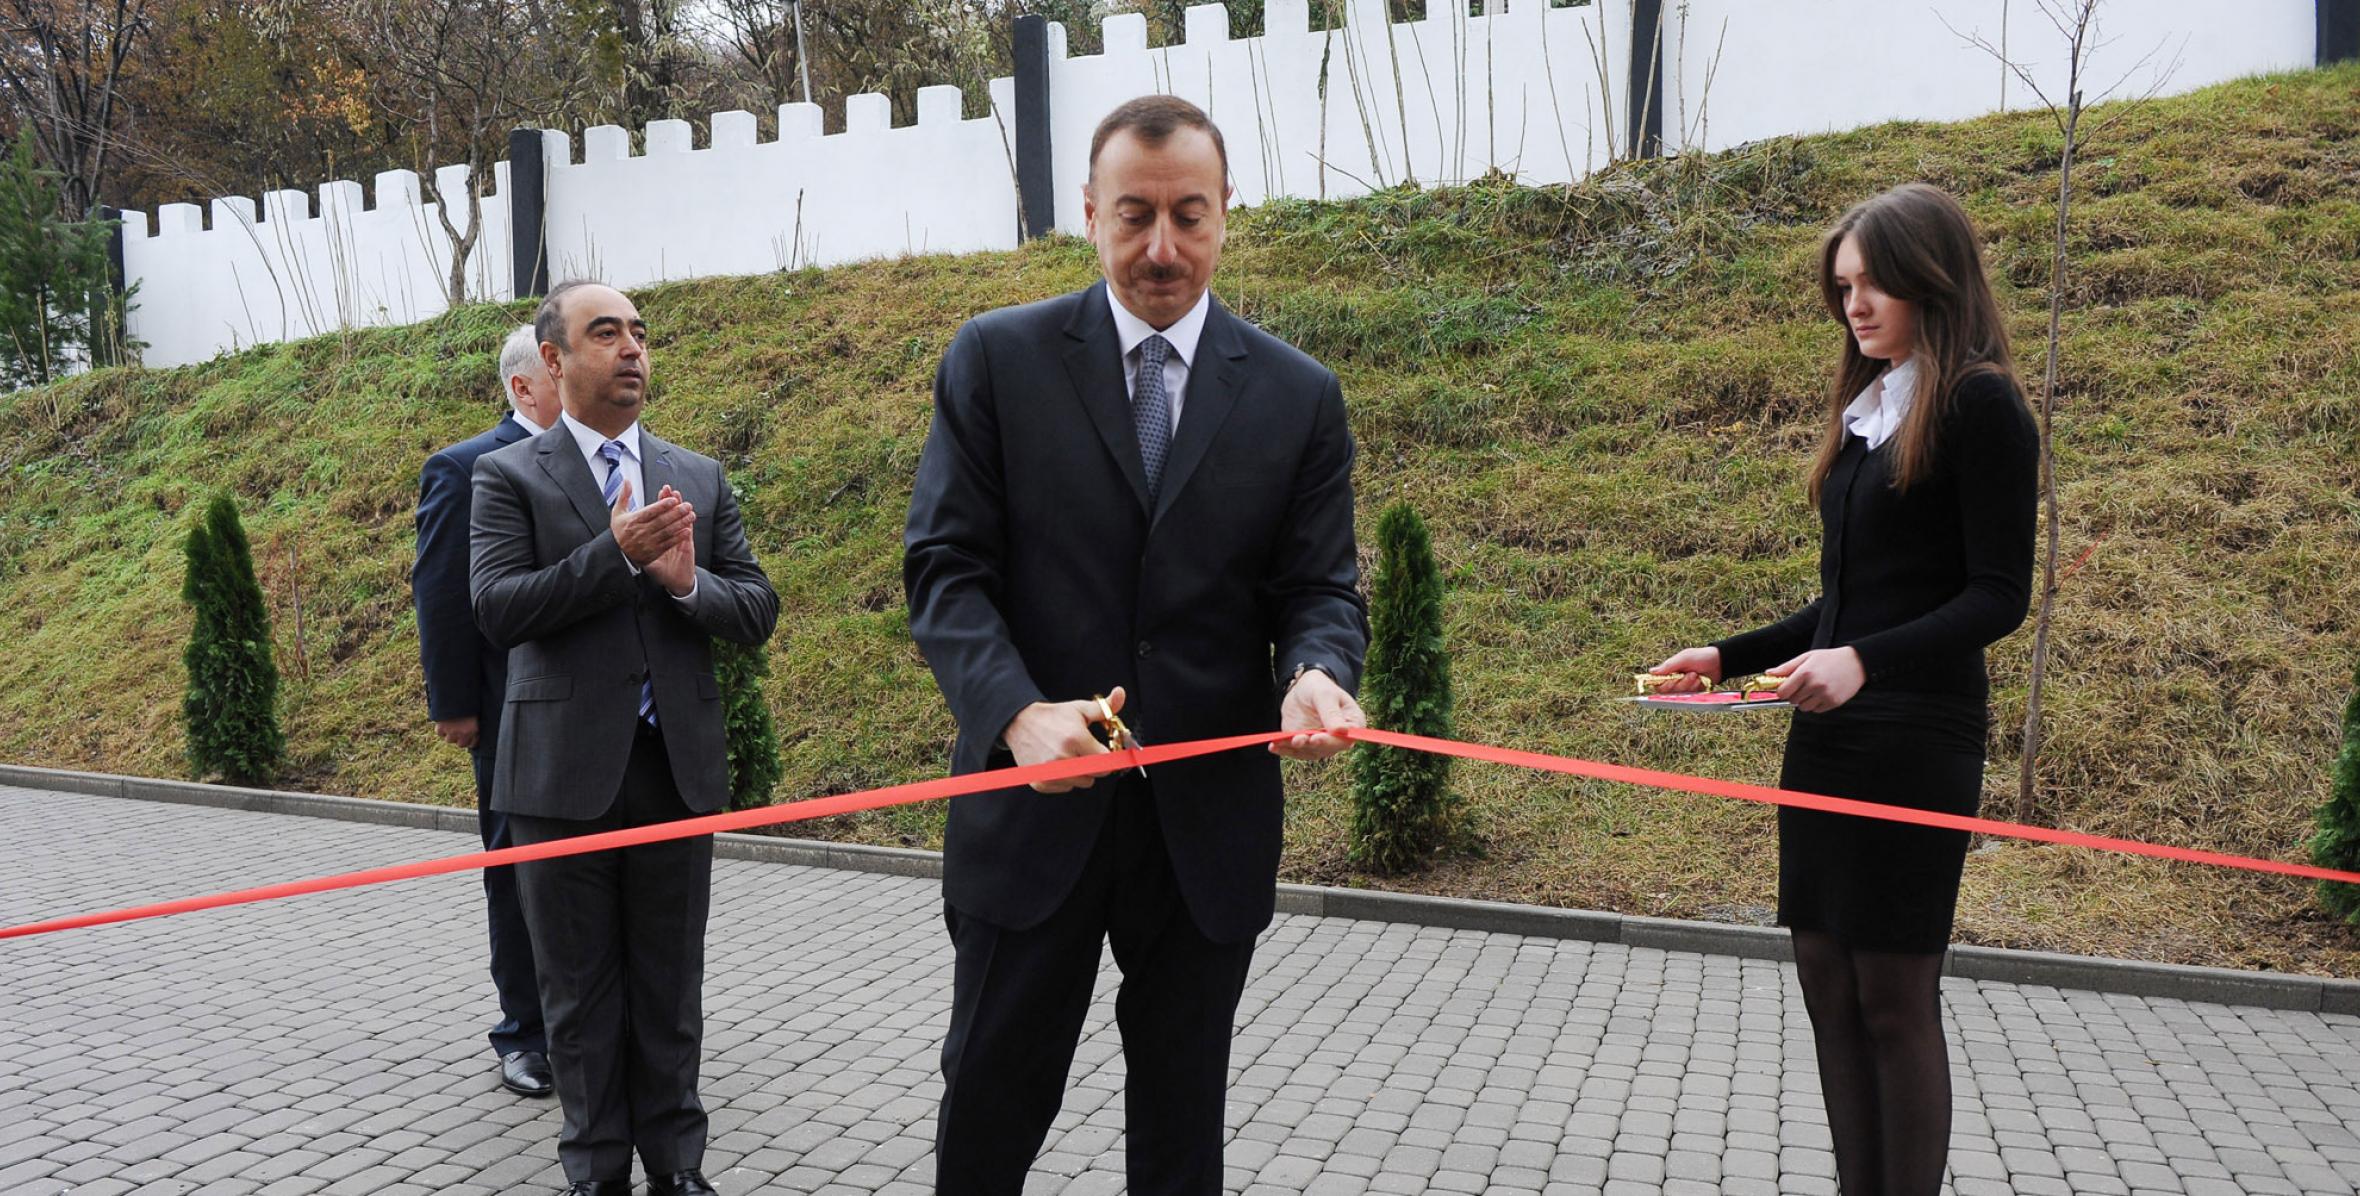 Ilham Aliyev attended the opening of the Green Hill Inn hotel in Shaki